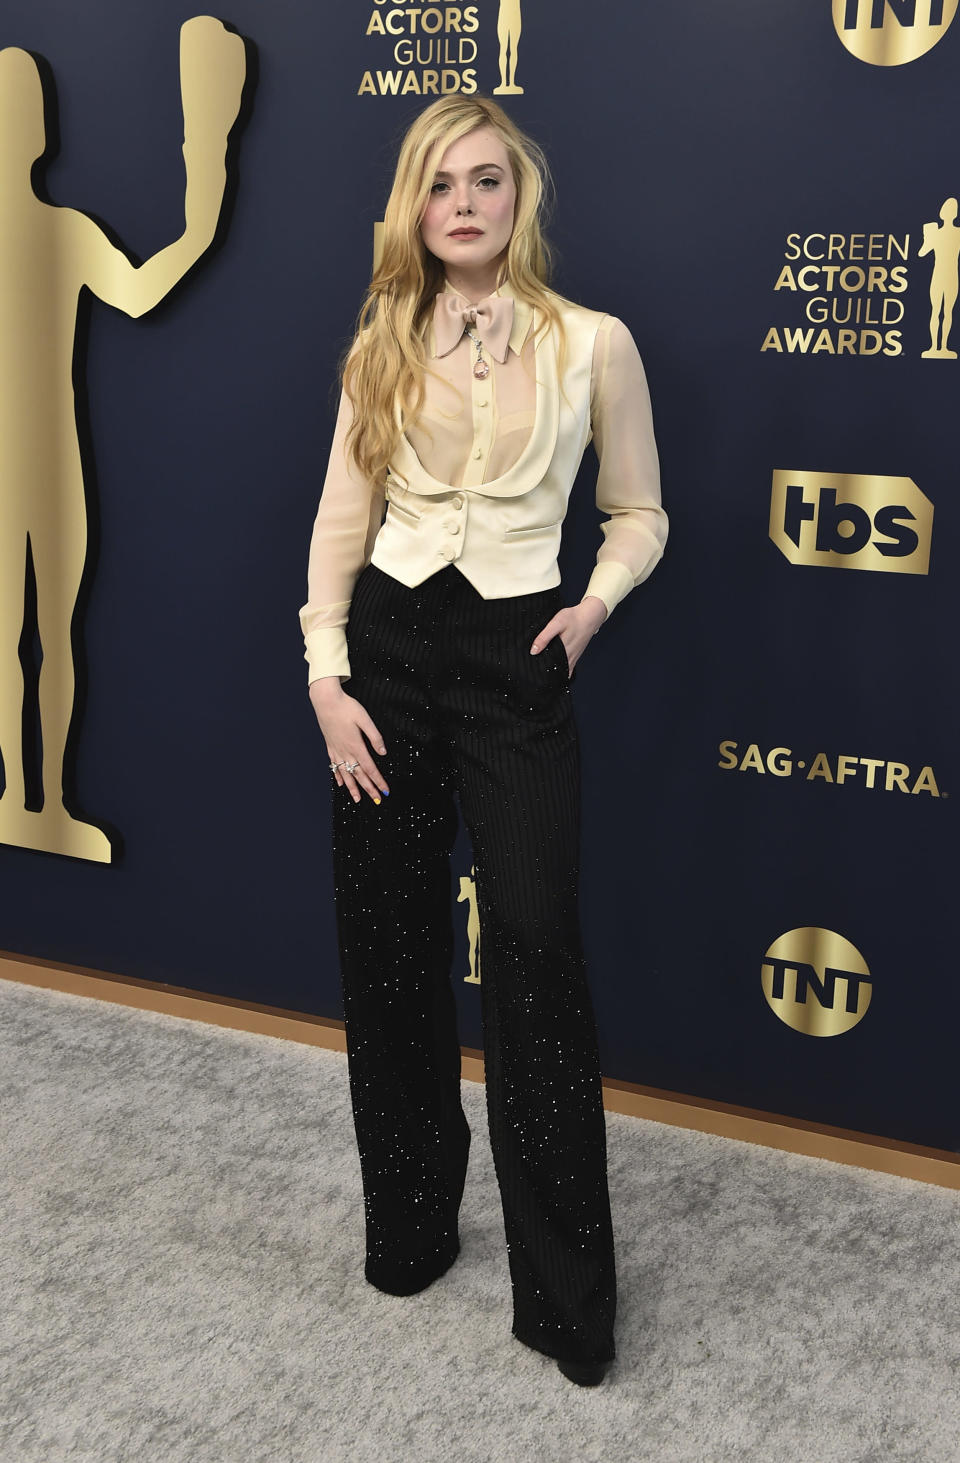 Elle Fanning arrives at the 28th annual Screen Actors Guild Awards at the Barker Hangar on Sunday, Feb. 27, 2022, in Santa Monica, Calif. (Photo by Jordan Strauss/Invision/AP)